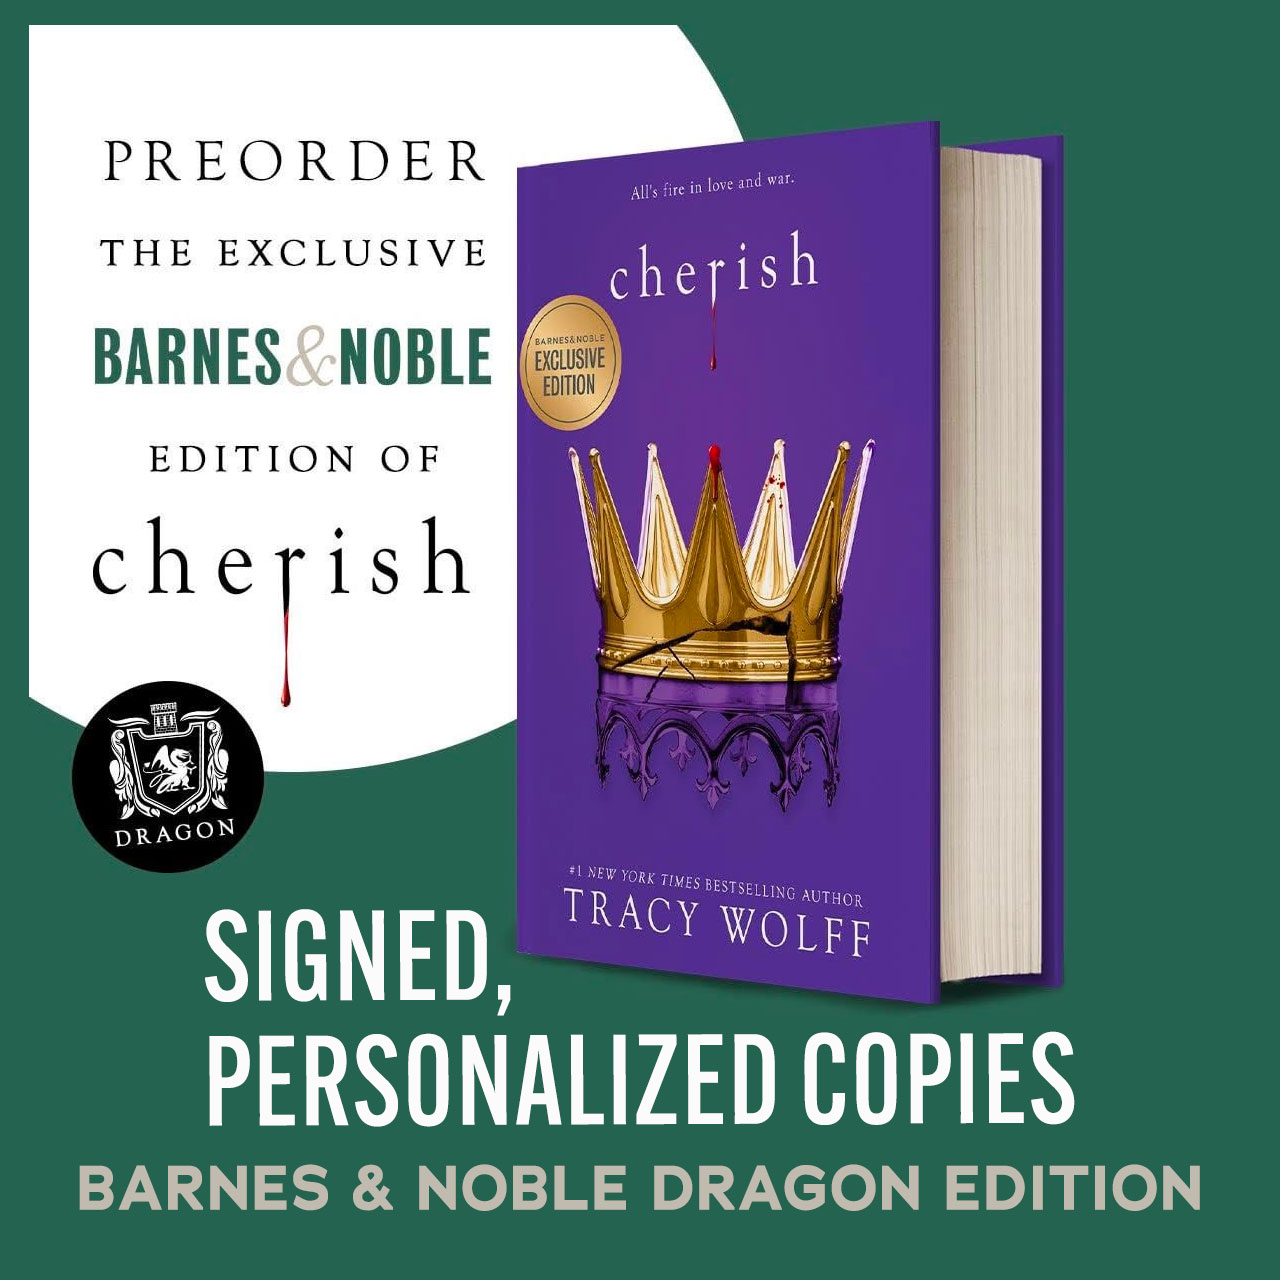 Interested in receiving a signed, personalized copy of CHERISH—Dragon style?